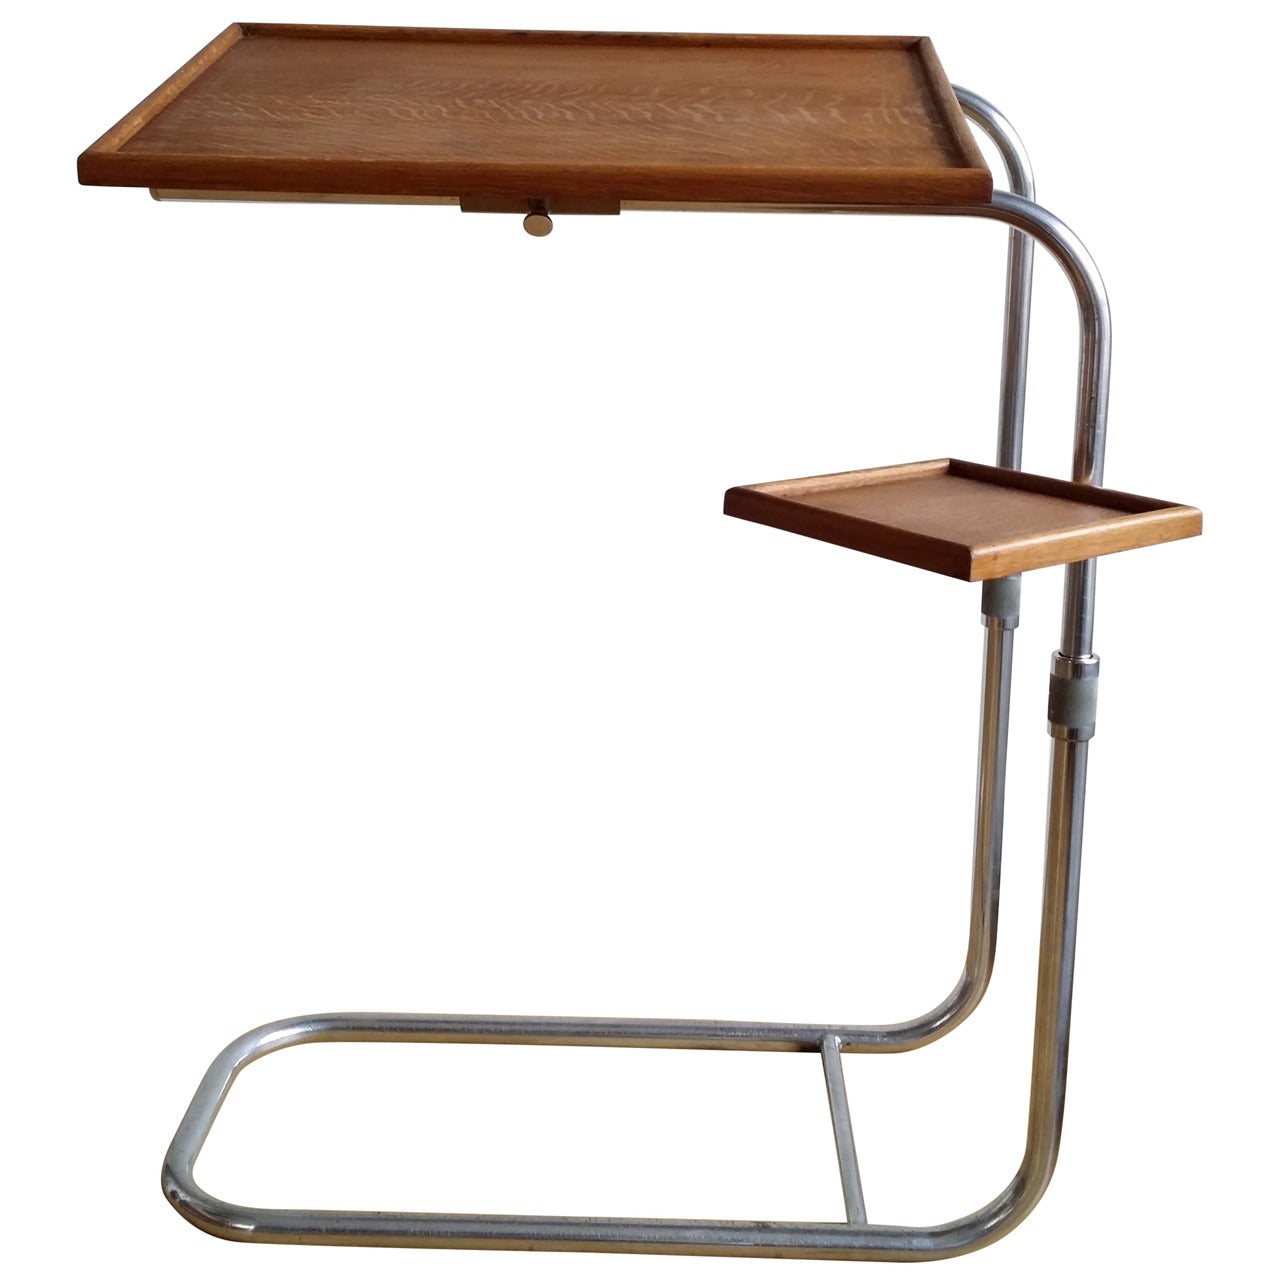 L'adaptable two tiered adjustable table - France 1950's - Ipso Facto